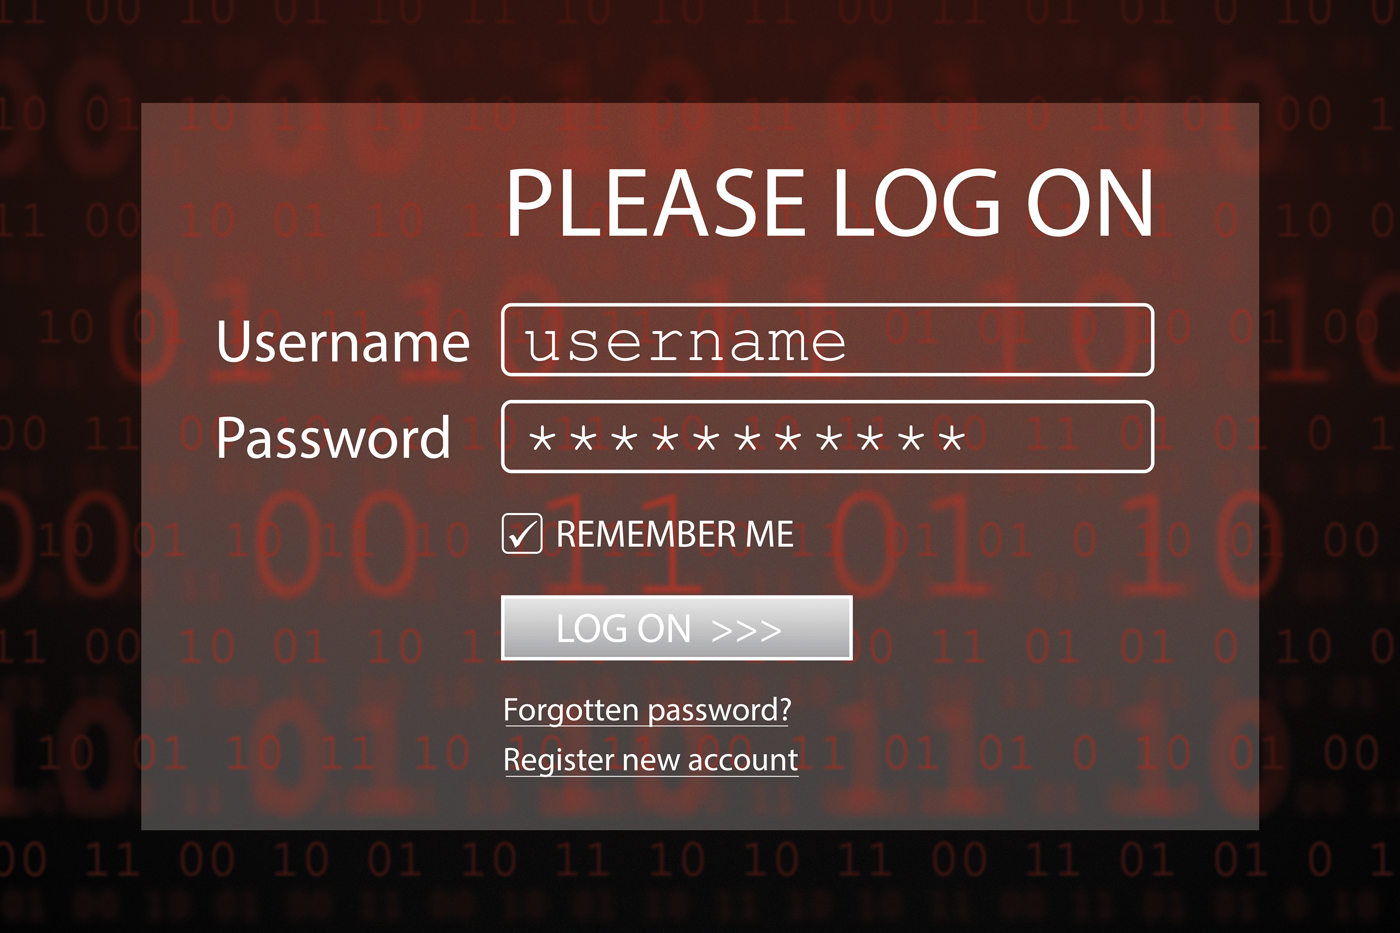 Stock image depicting a computer screen with username and password fields and a log on button.